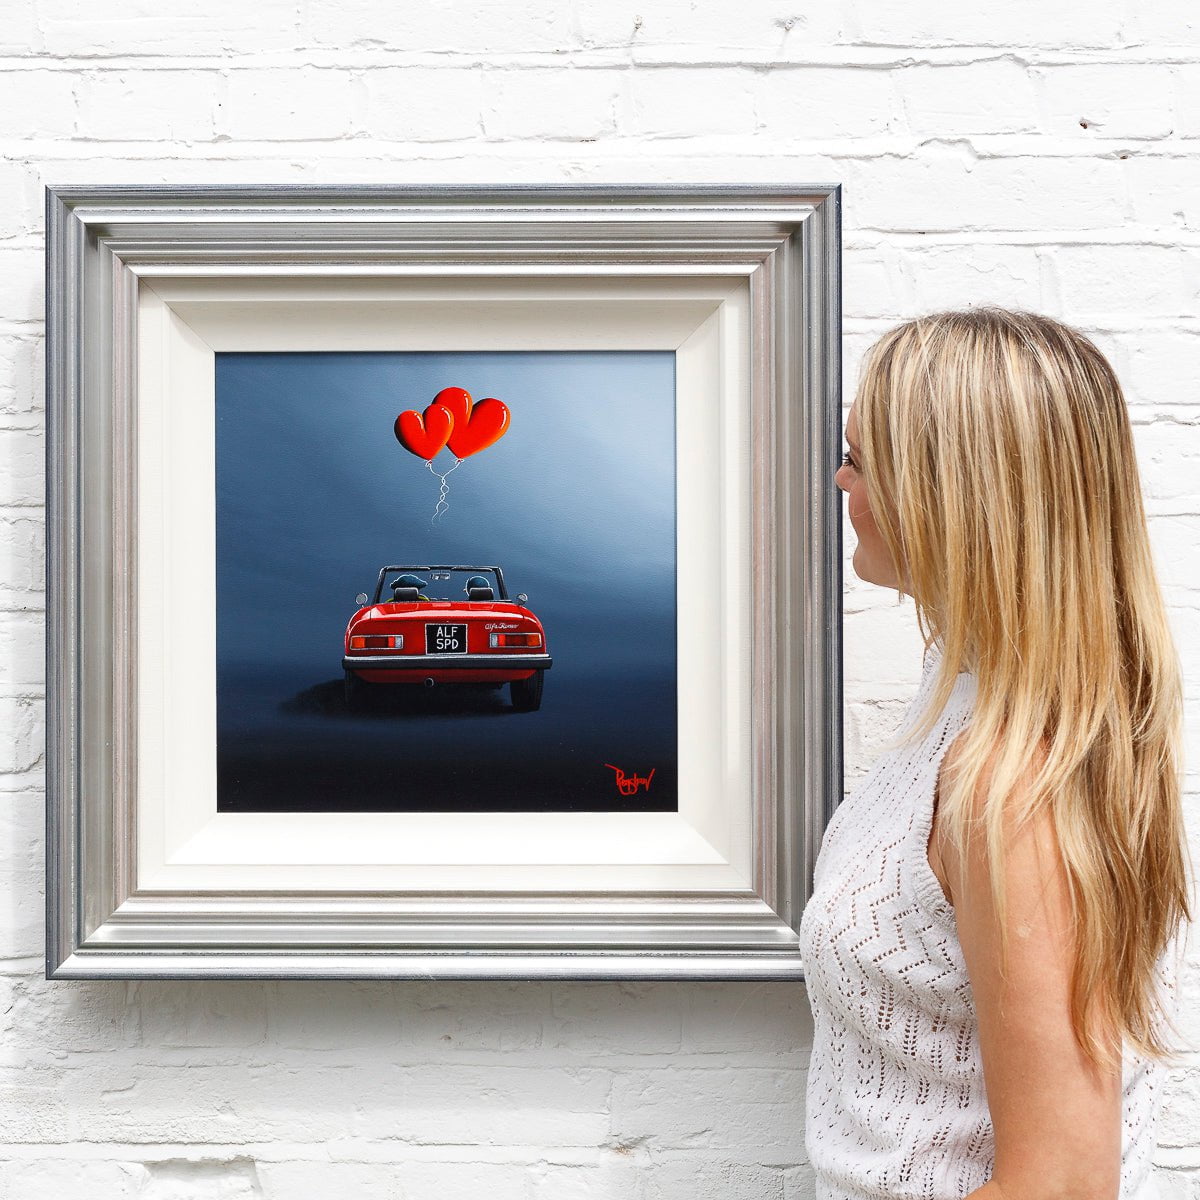 On The Road With You - Original David Renshaw Framed